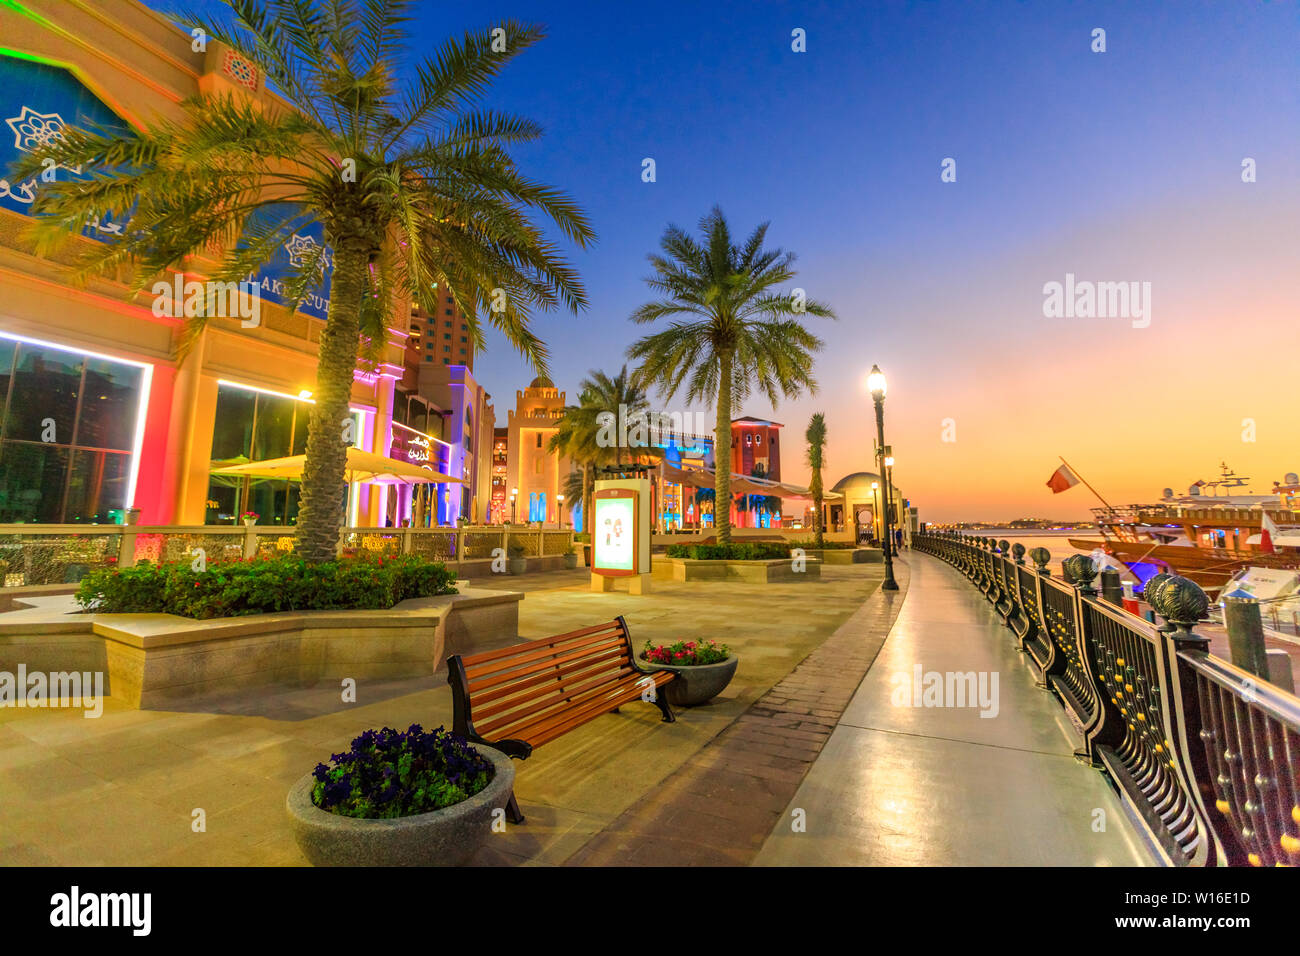 Doha, Qatar - February 18, 2019:Palm trees in walkway of Porto Arabia at the Pearl-Qatar, Doha, with skyscrapers of West Bay skyline at sunset sky Stock Photo